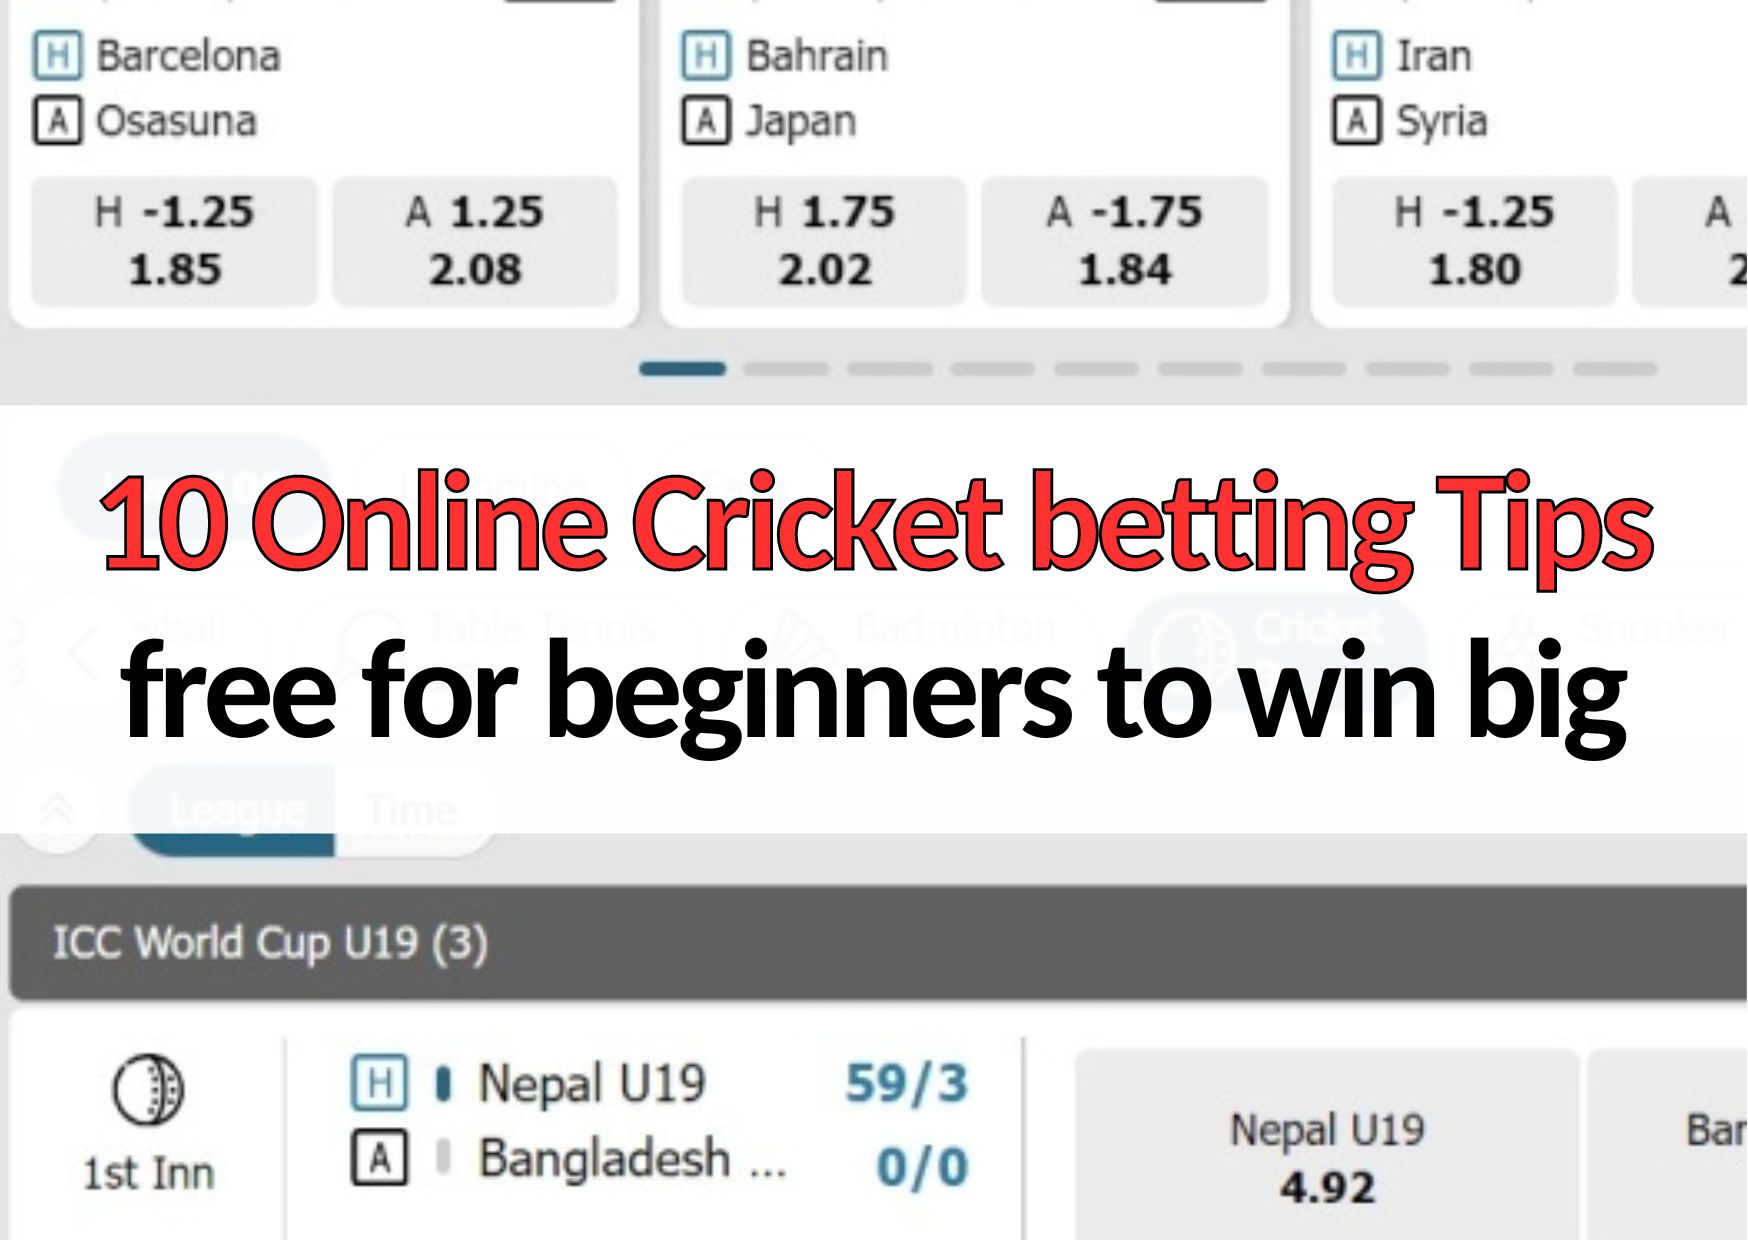 10 online cricket betting tips free for beginners to win big